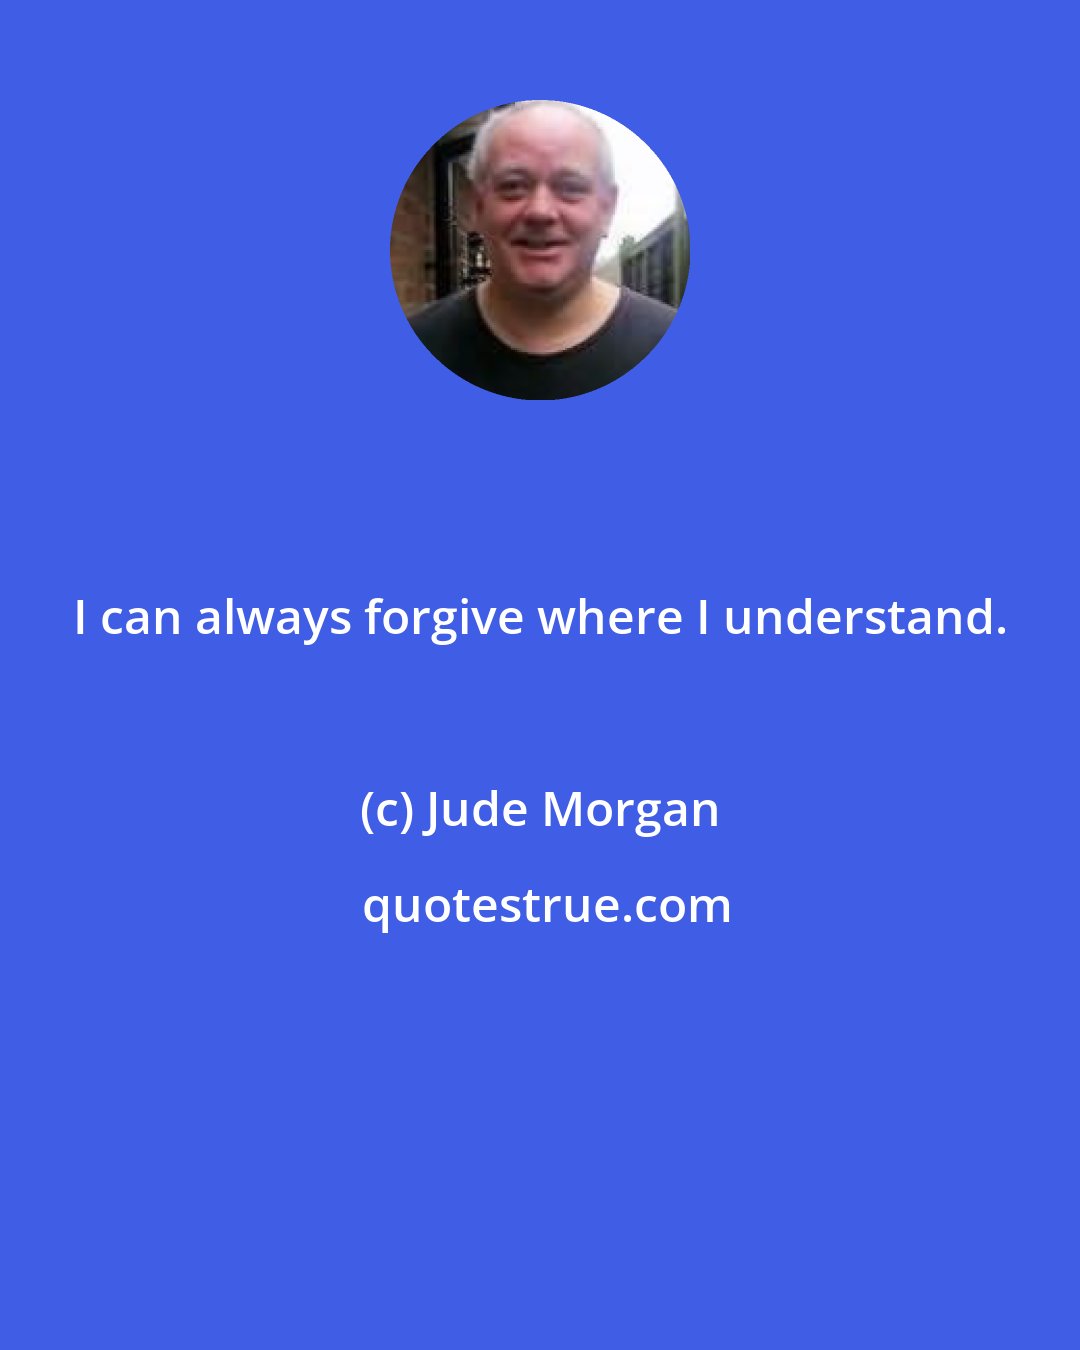 Jude Morgan: I can always forgive where I understand.